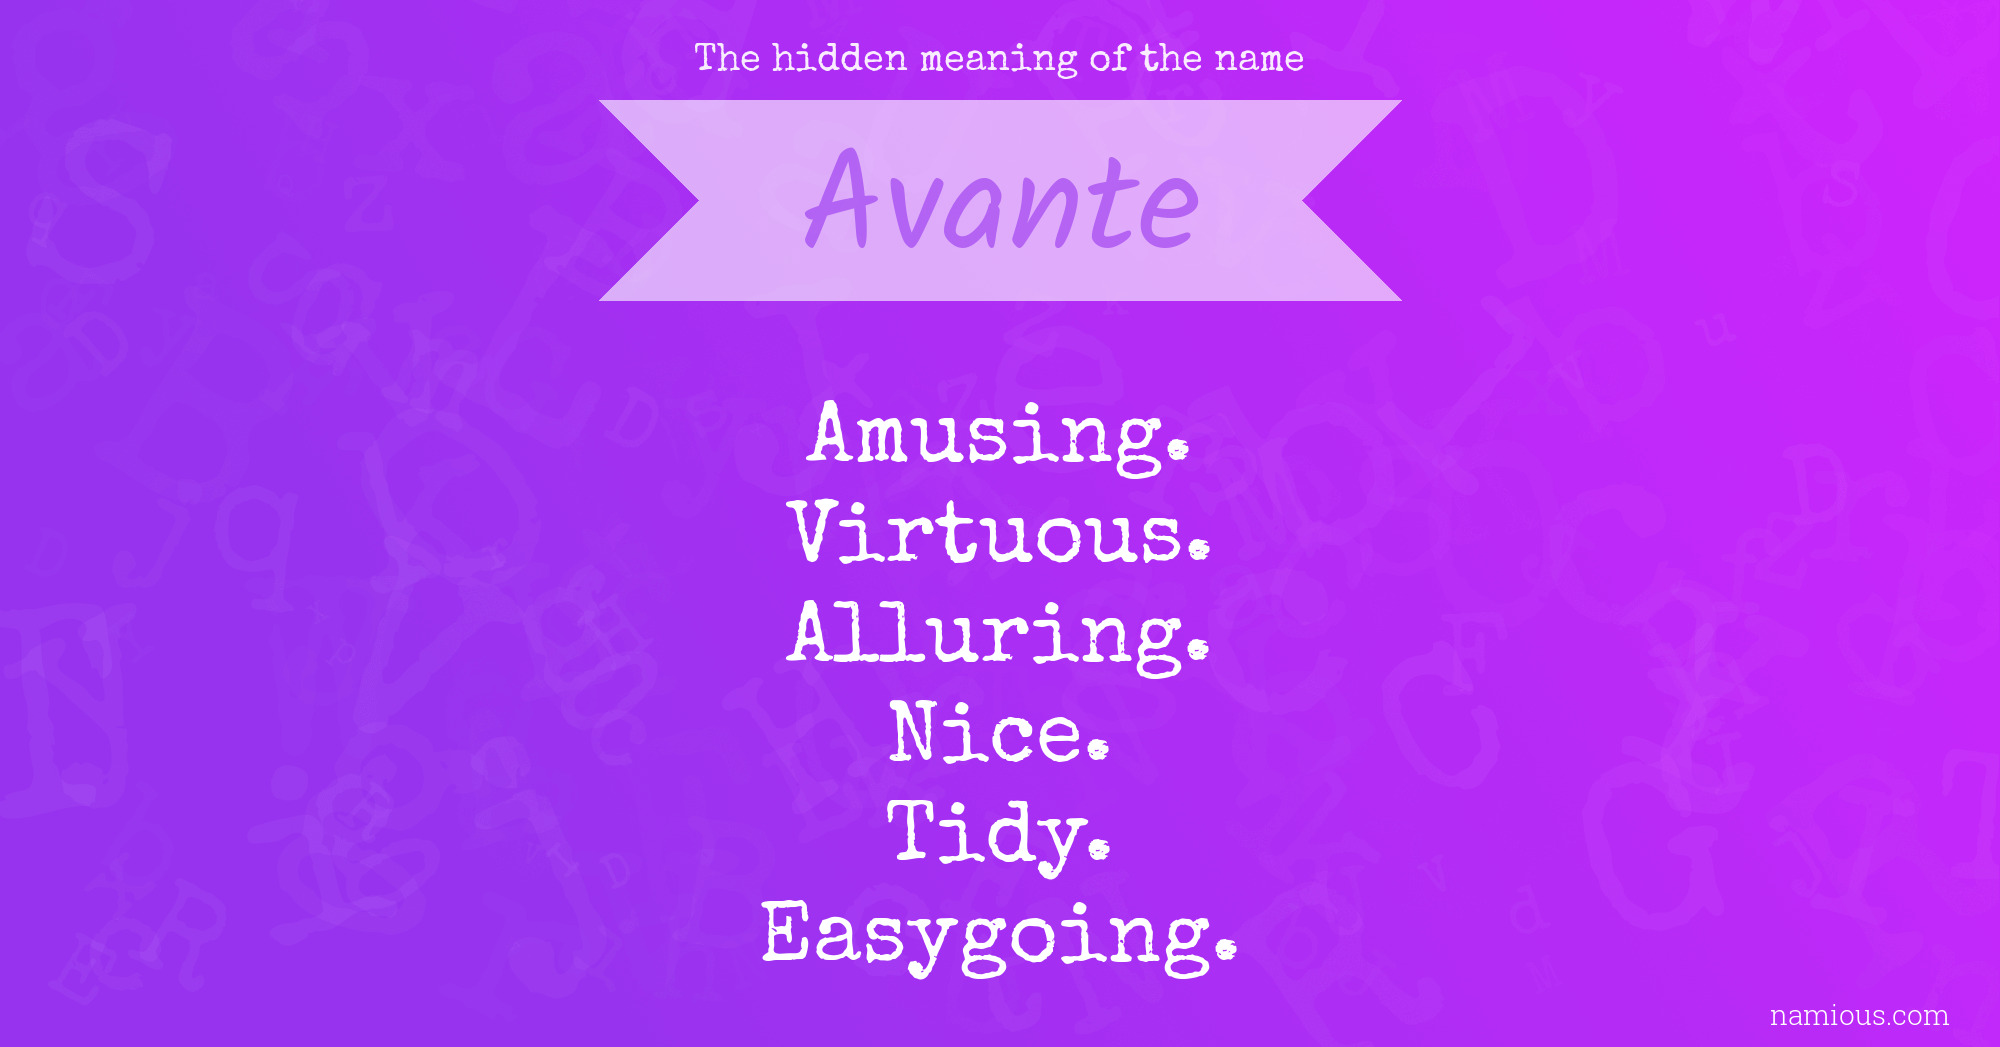 The hidden meaning of the name Avante